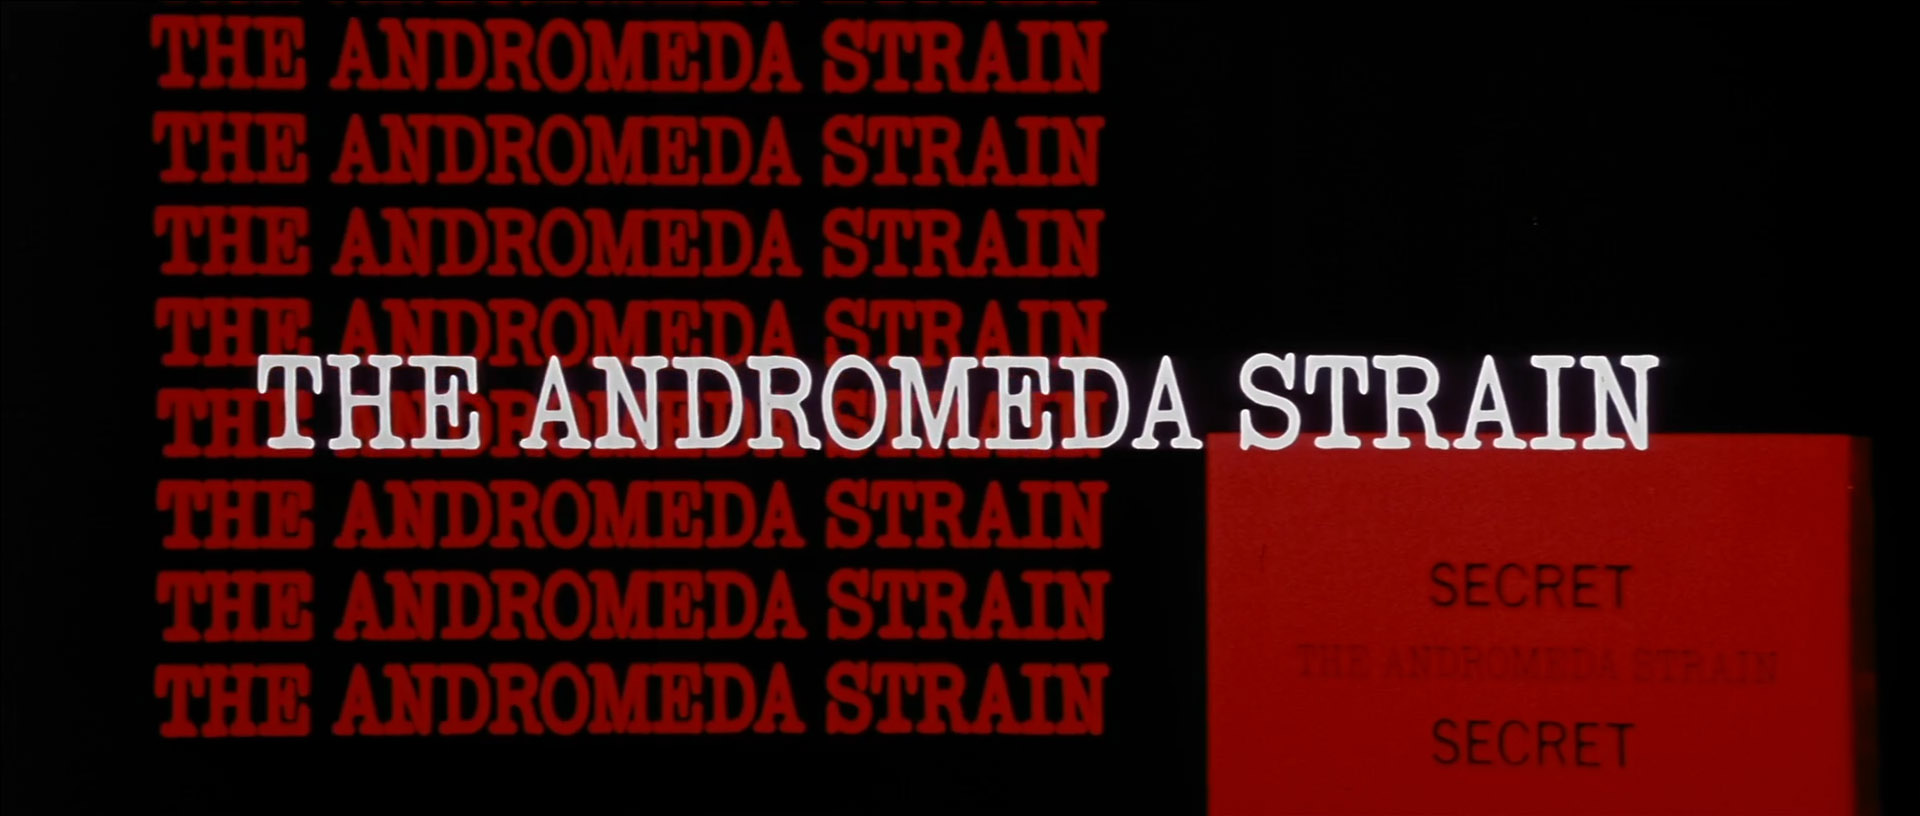 the andromeda strain book review